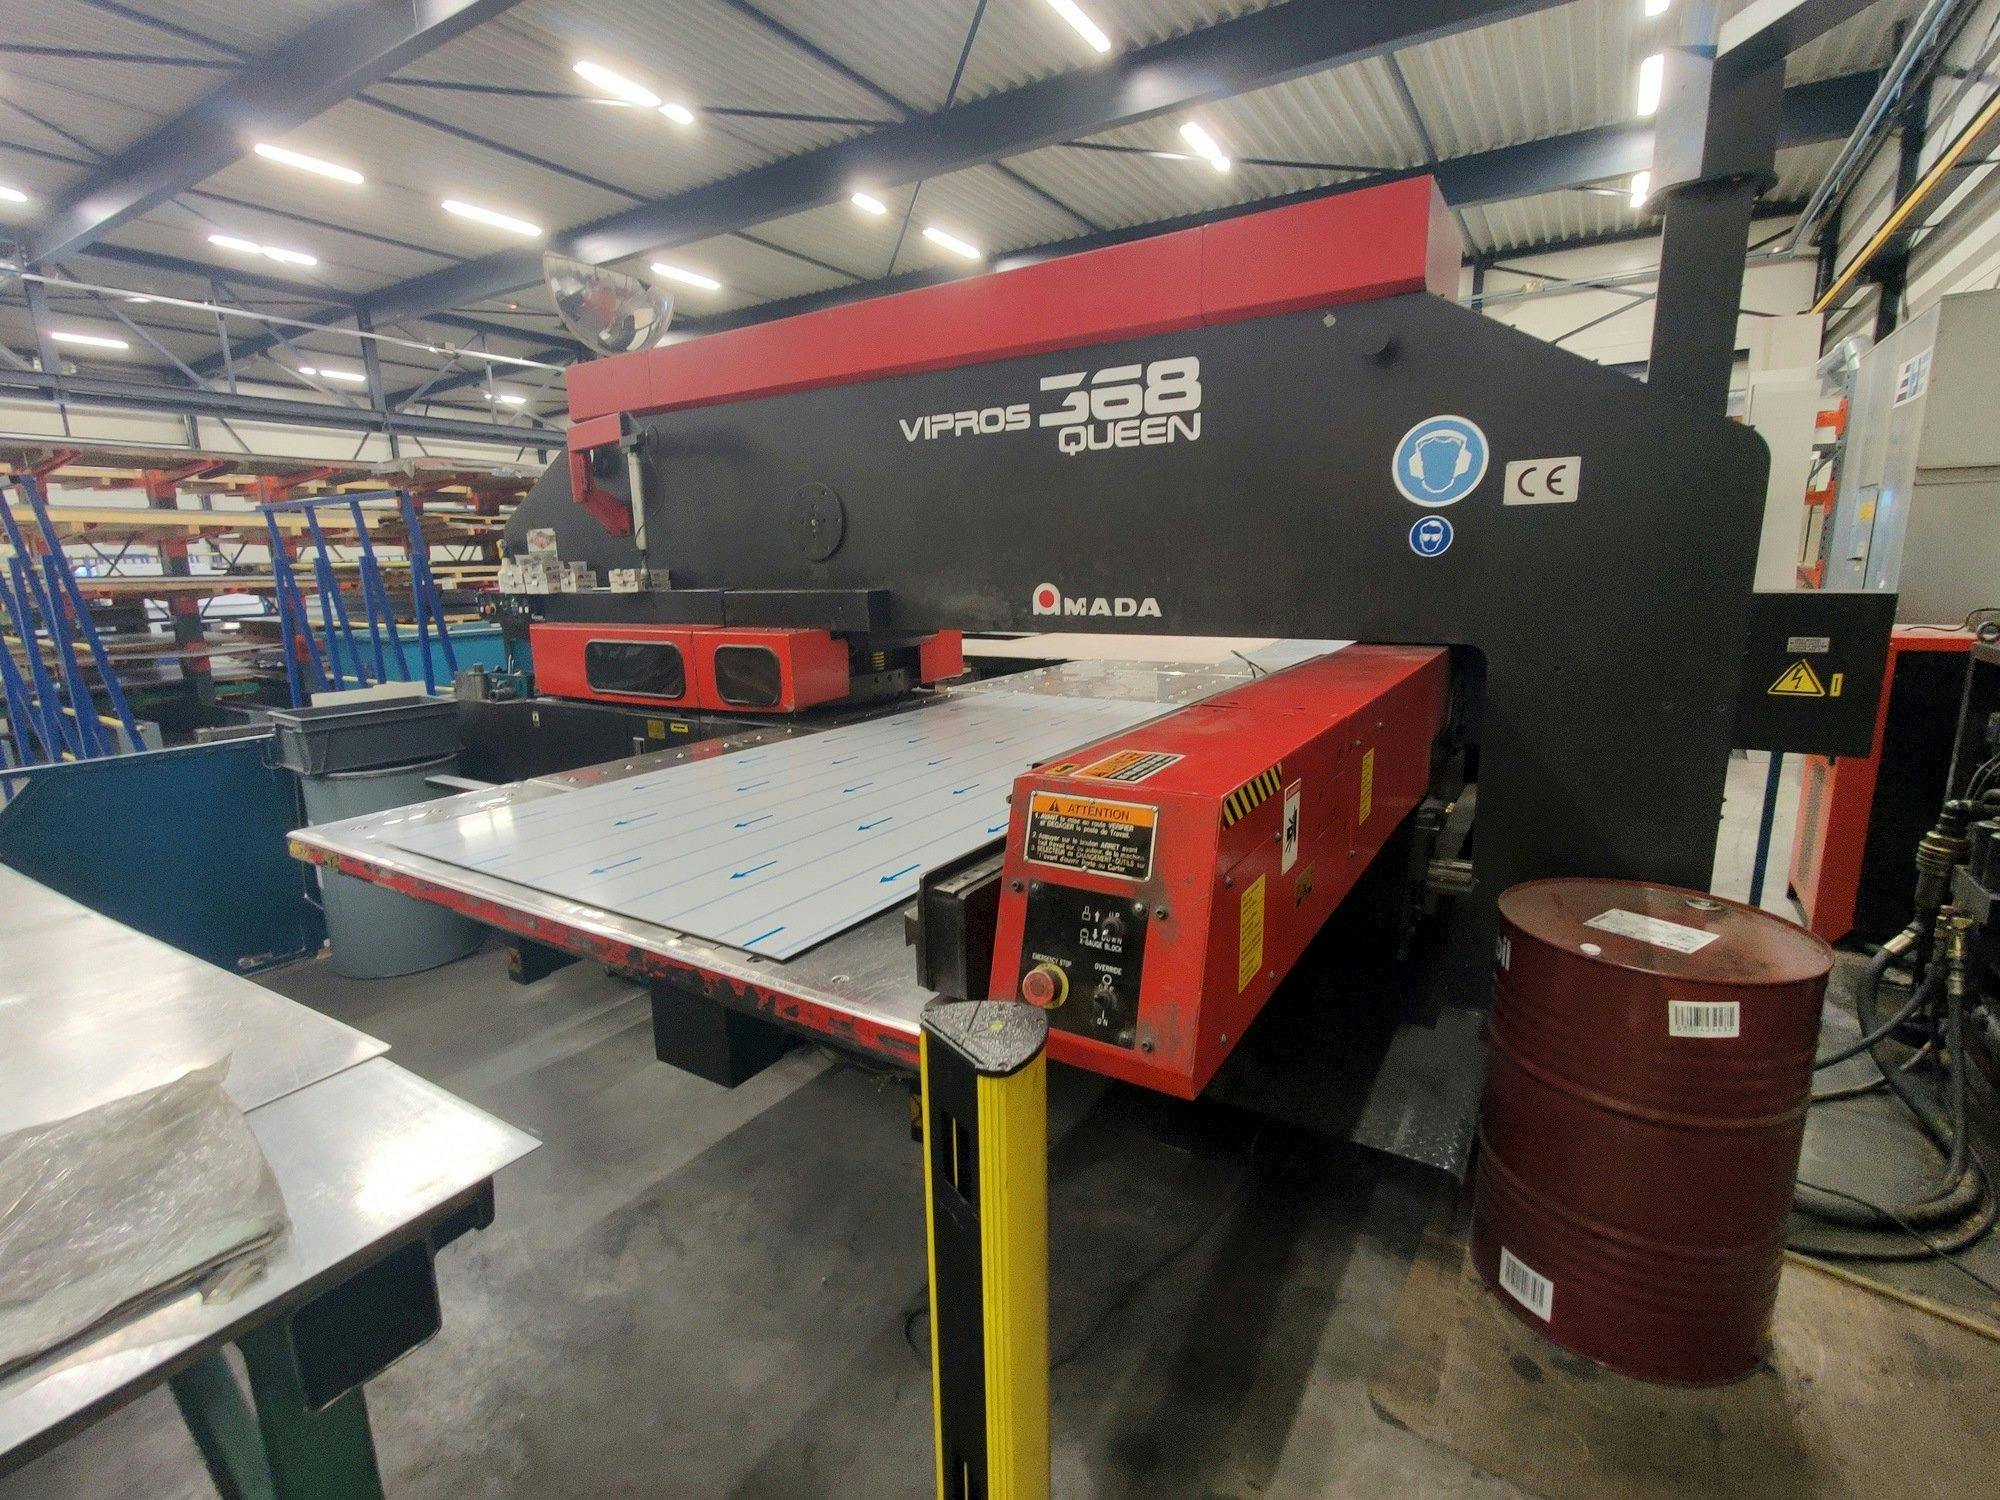 Front view of AMADA Vipros 357 Queen  machine